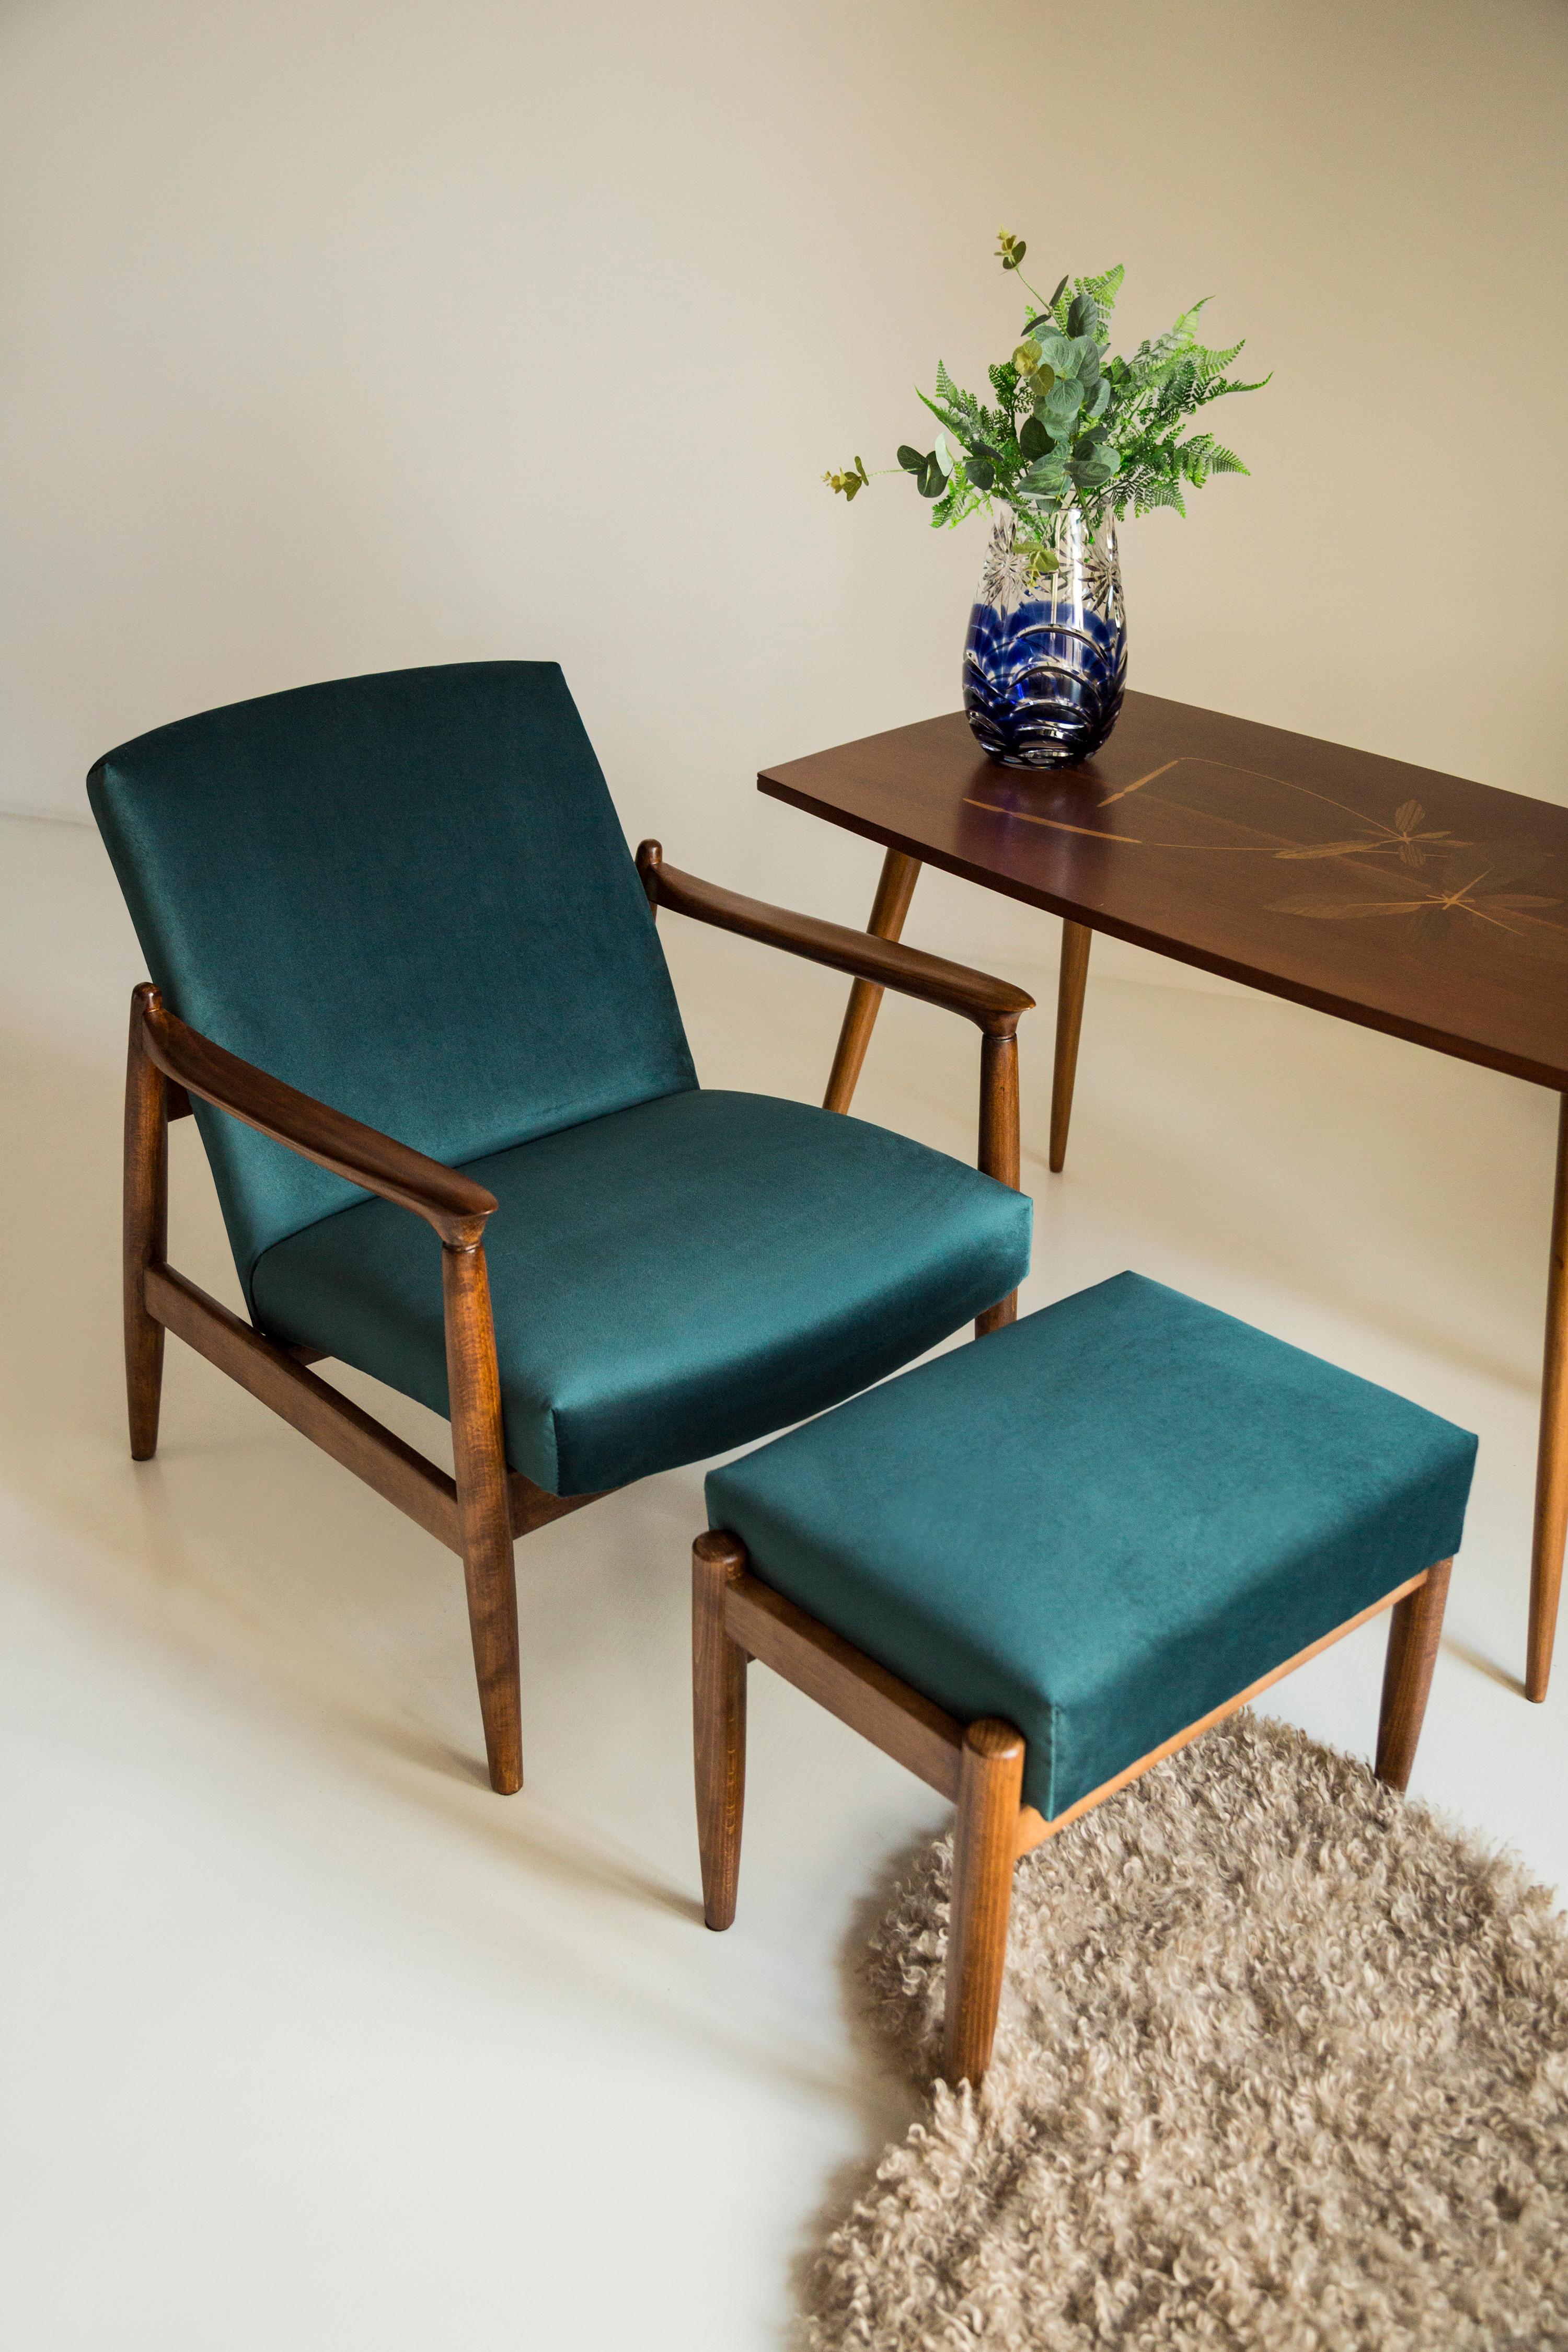 A pair of beautiful armchairs, designed by Edmund Homa. The armchairs were made in the 1960s in the Gosciecinska Furniture factory. They are made from solid beechwood. The GFM type armchair is regarded one of the best polish armchair design from the